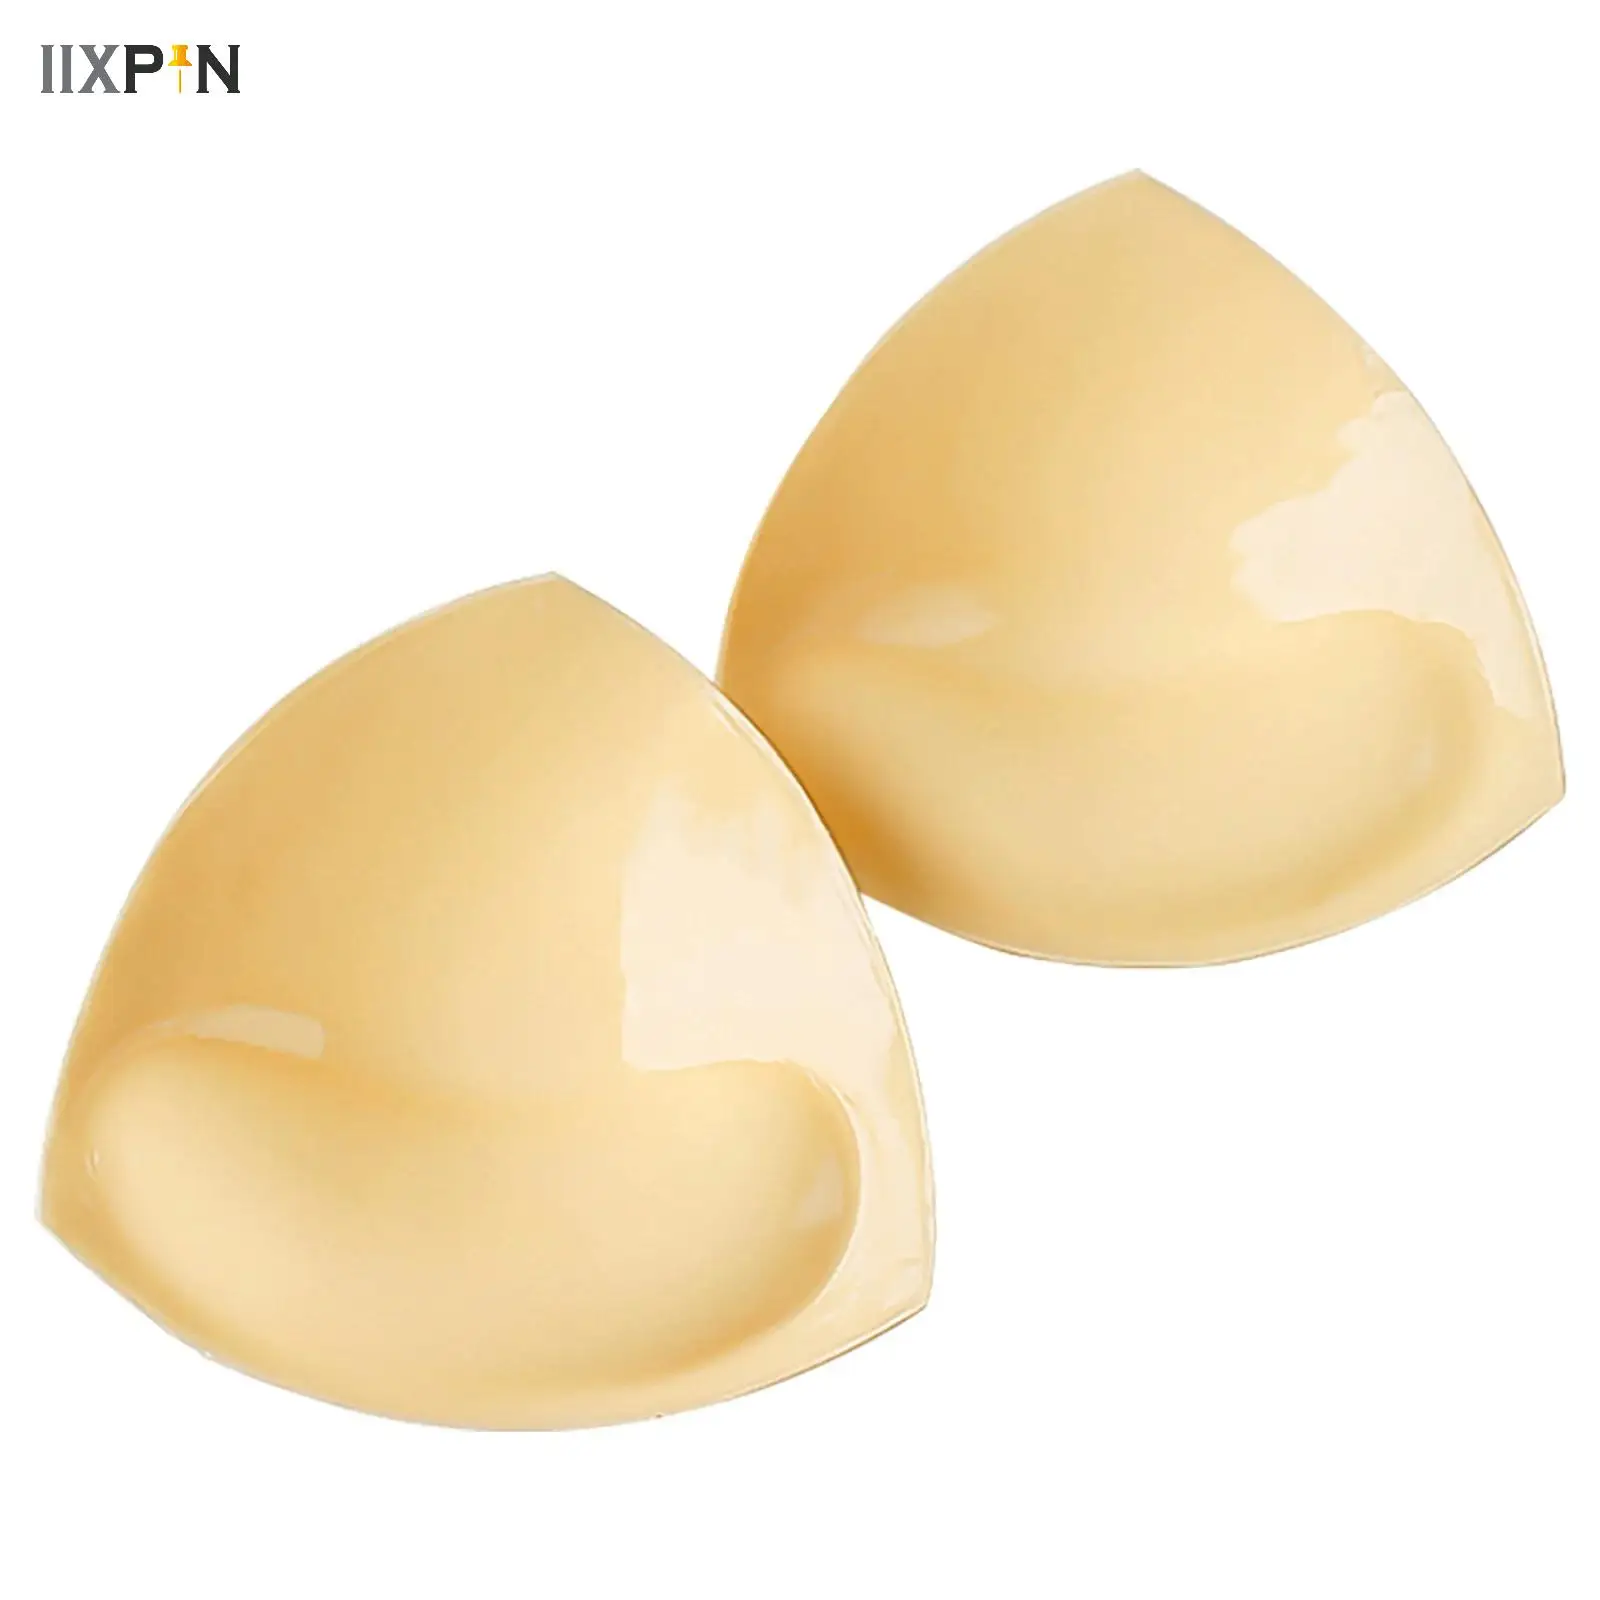 

1 Pair Sticky Bra Pads Double-sided Push Up Sponge Chest Stickers Lifting Breast Enhancer Self-adhesive Bra Inserts Accessories